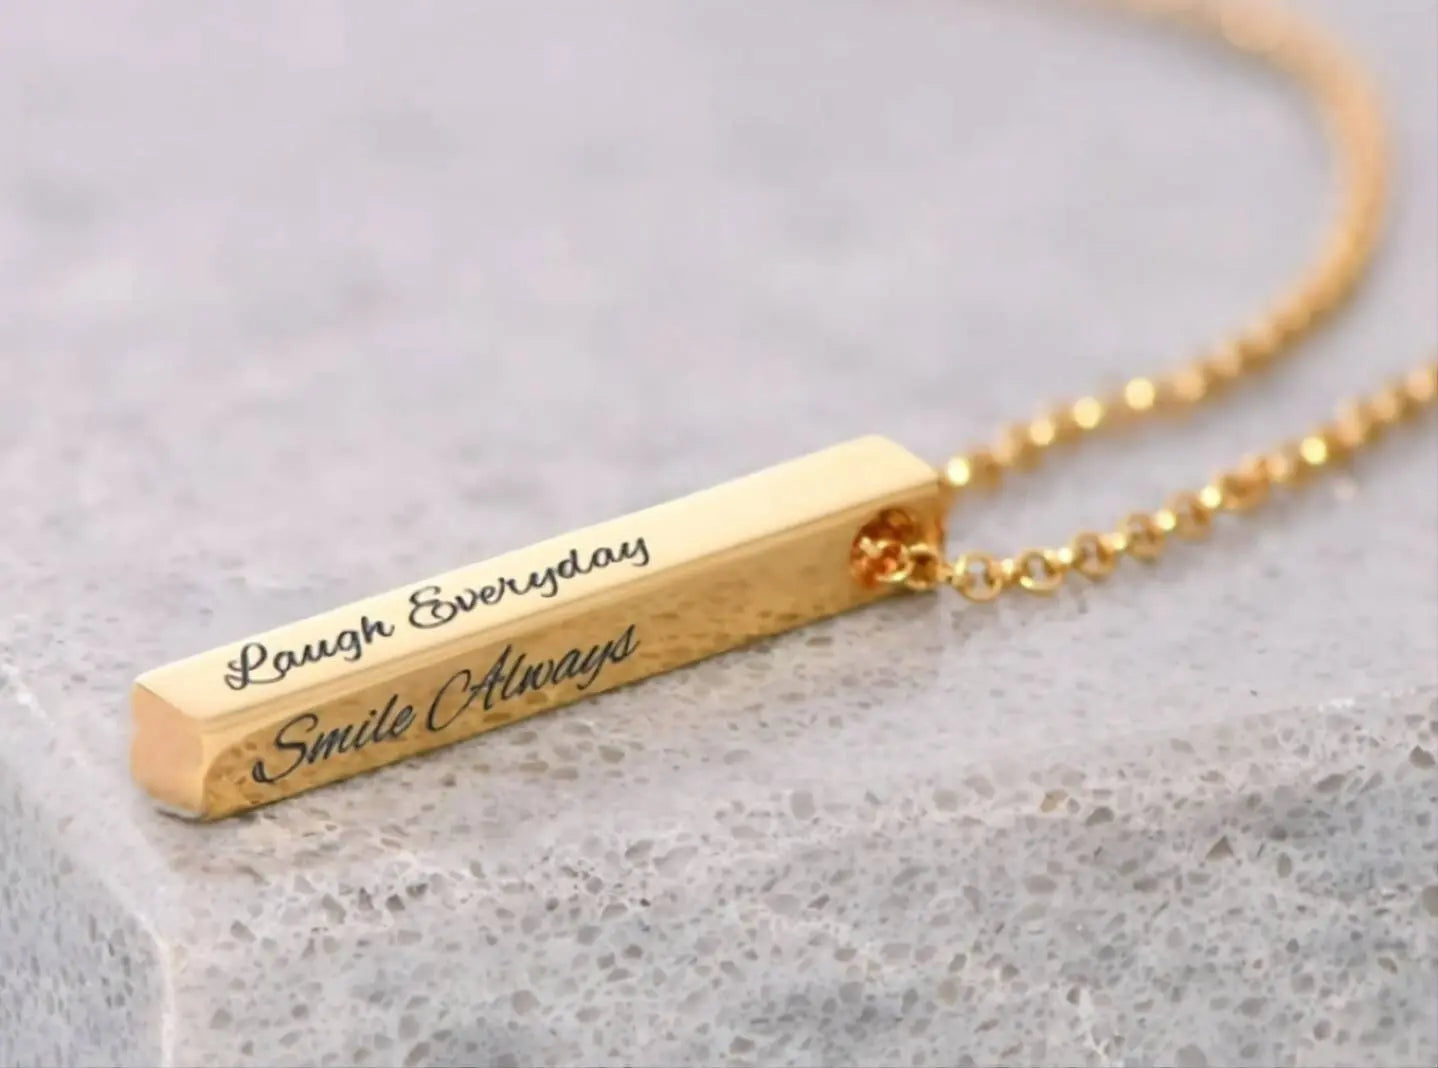 18k Plated Gold 3D Bar Necklace, 4 Sided Vertical Cube Bar, Gold Bar Jewelry, 4 Sides Family Kids Names Engraved Memorial Bar Necklace JettsJewelers